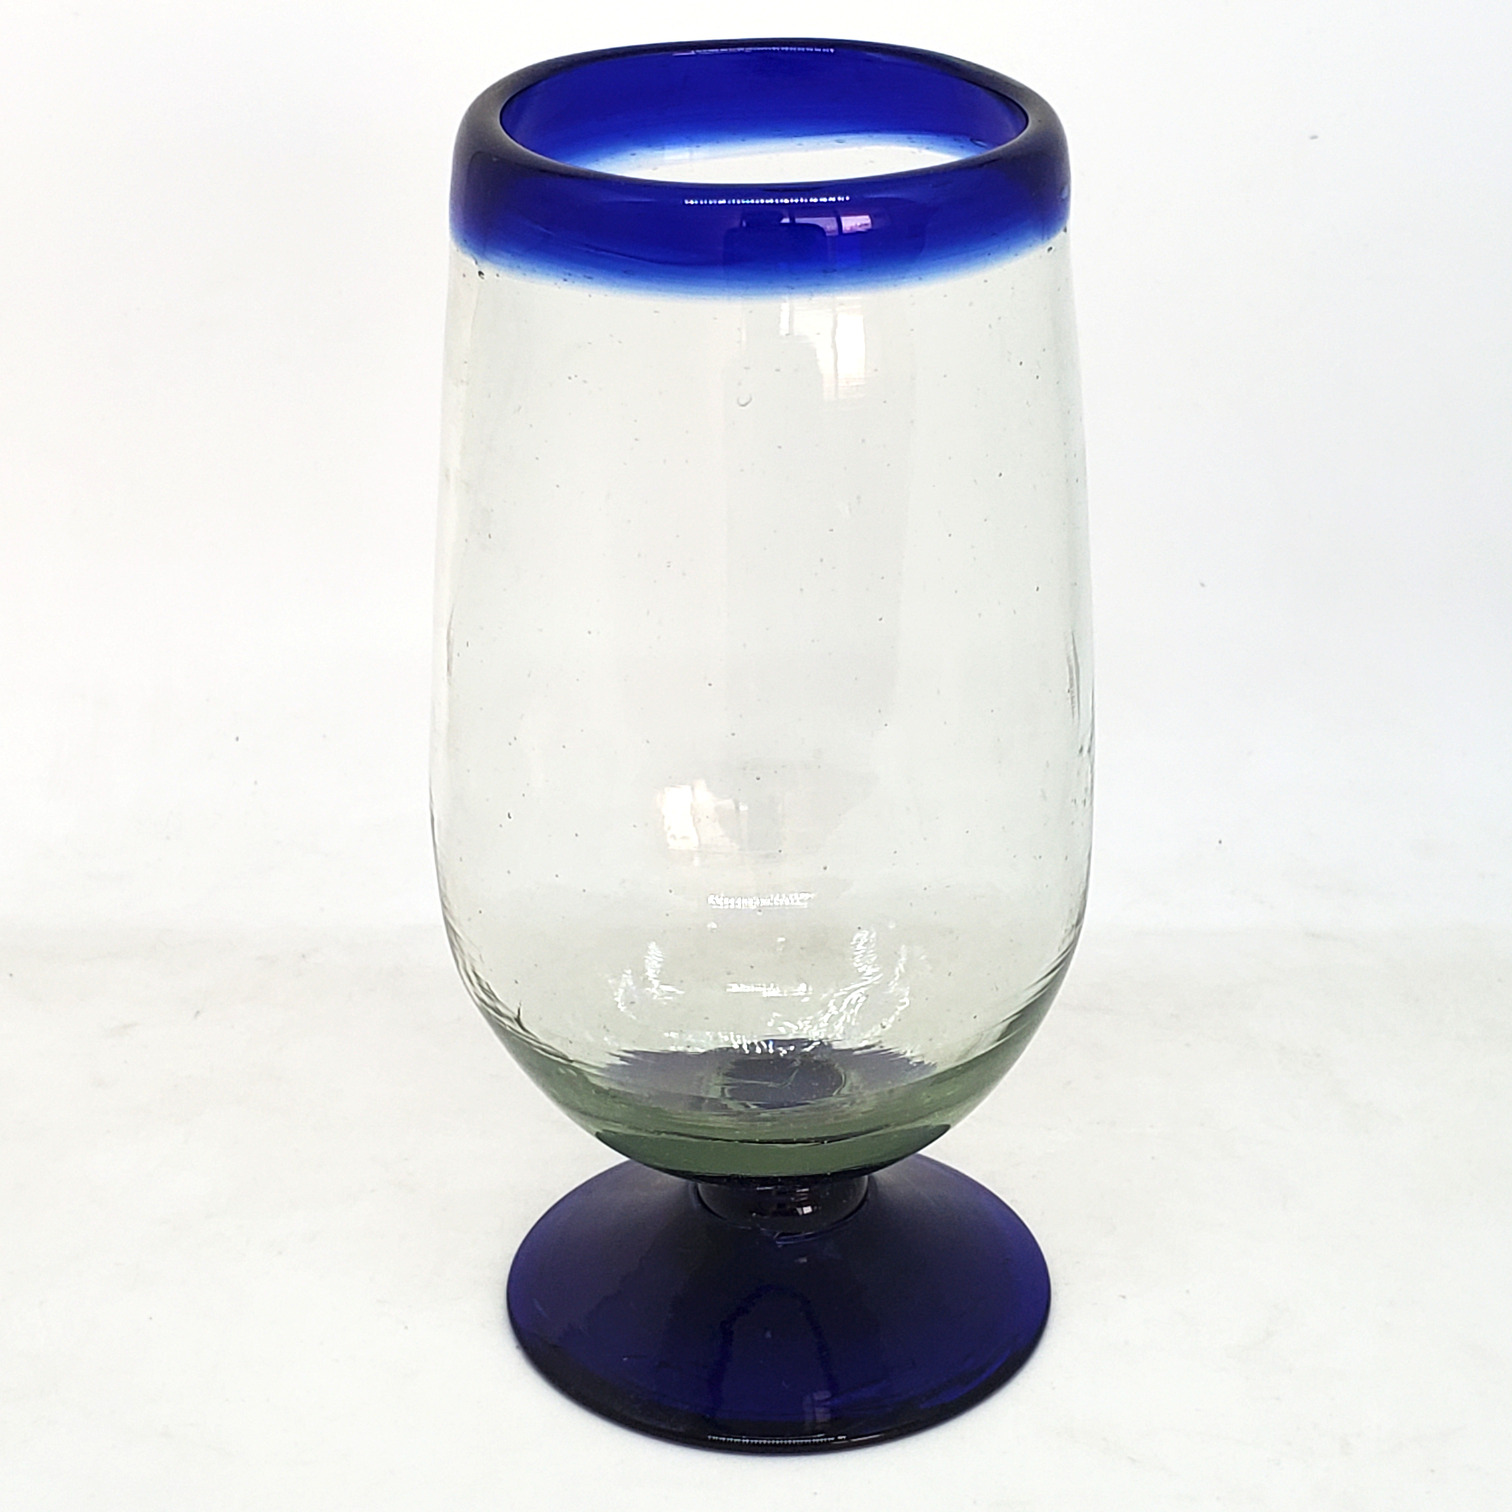 MEXICAN GLASSWARE / Cobalt Blue Rim 17 oz Tall Water Goblets (set of 6) / These tall water goblets will embellish your table setting and give it a festive feel. Made from authentic hand blown recycled glass.